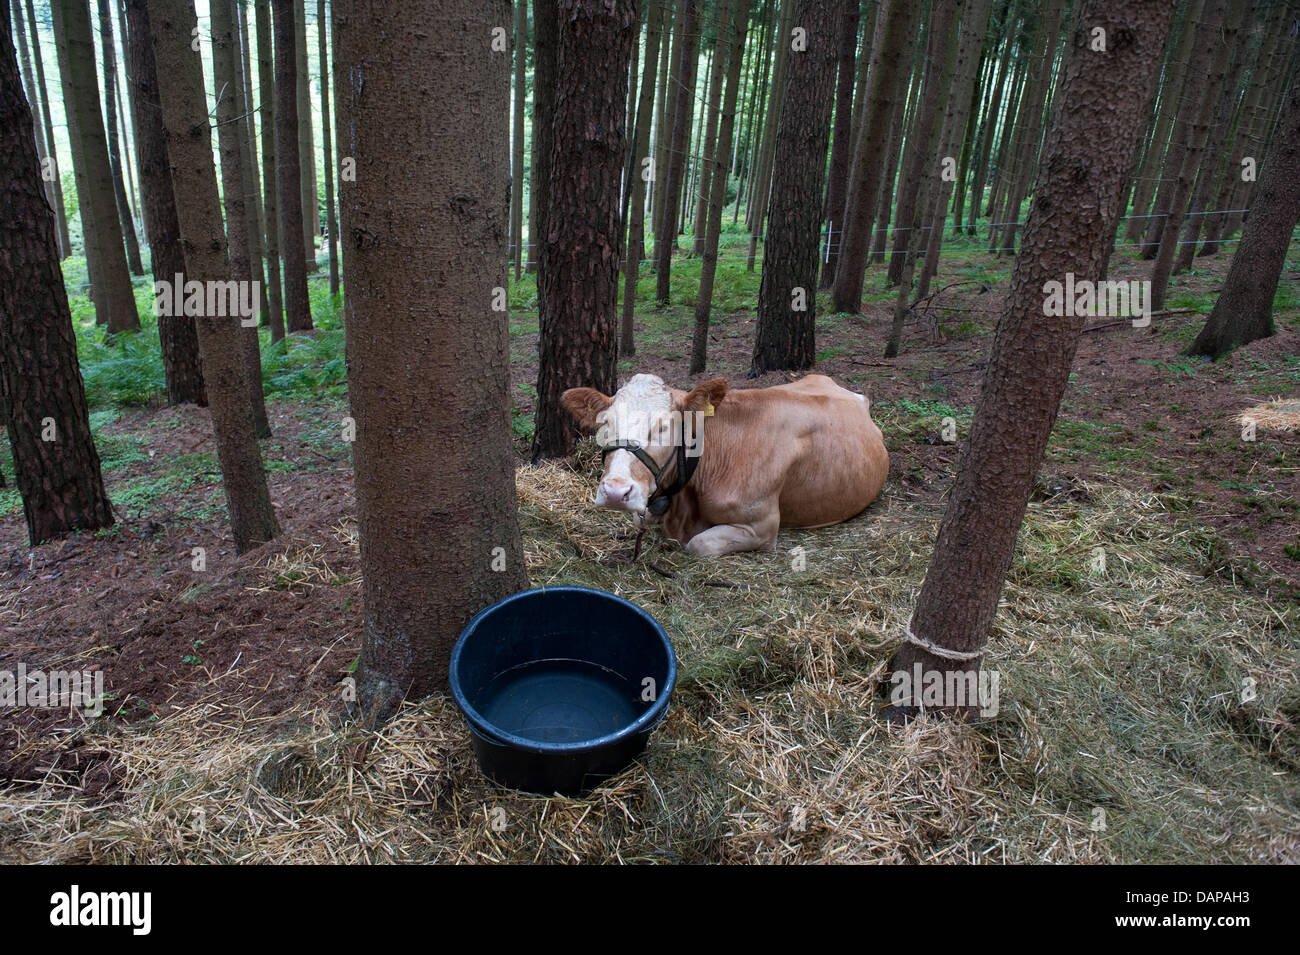 Cow 'Waltraut' lies in a forest in Zangberg near Muehldorf A.Inn, Germany, 07 August 2011. Waltraut shall attract her sister Yvonne, who escaped from a farm shortly before she was to be slaughtered at the end of Mai. Photo: Armin Weigel Stock Photo